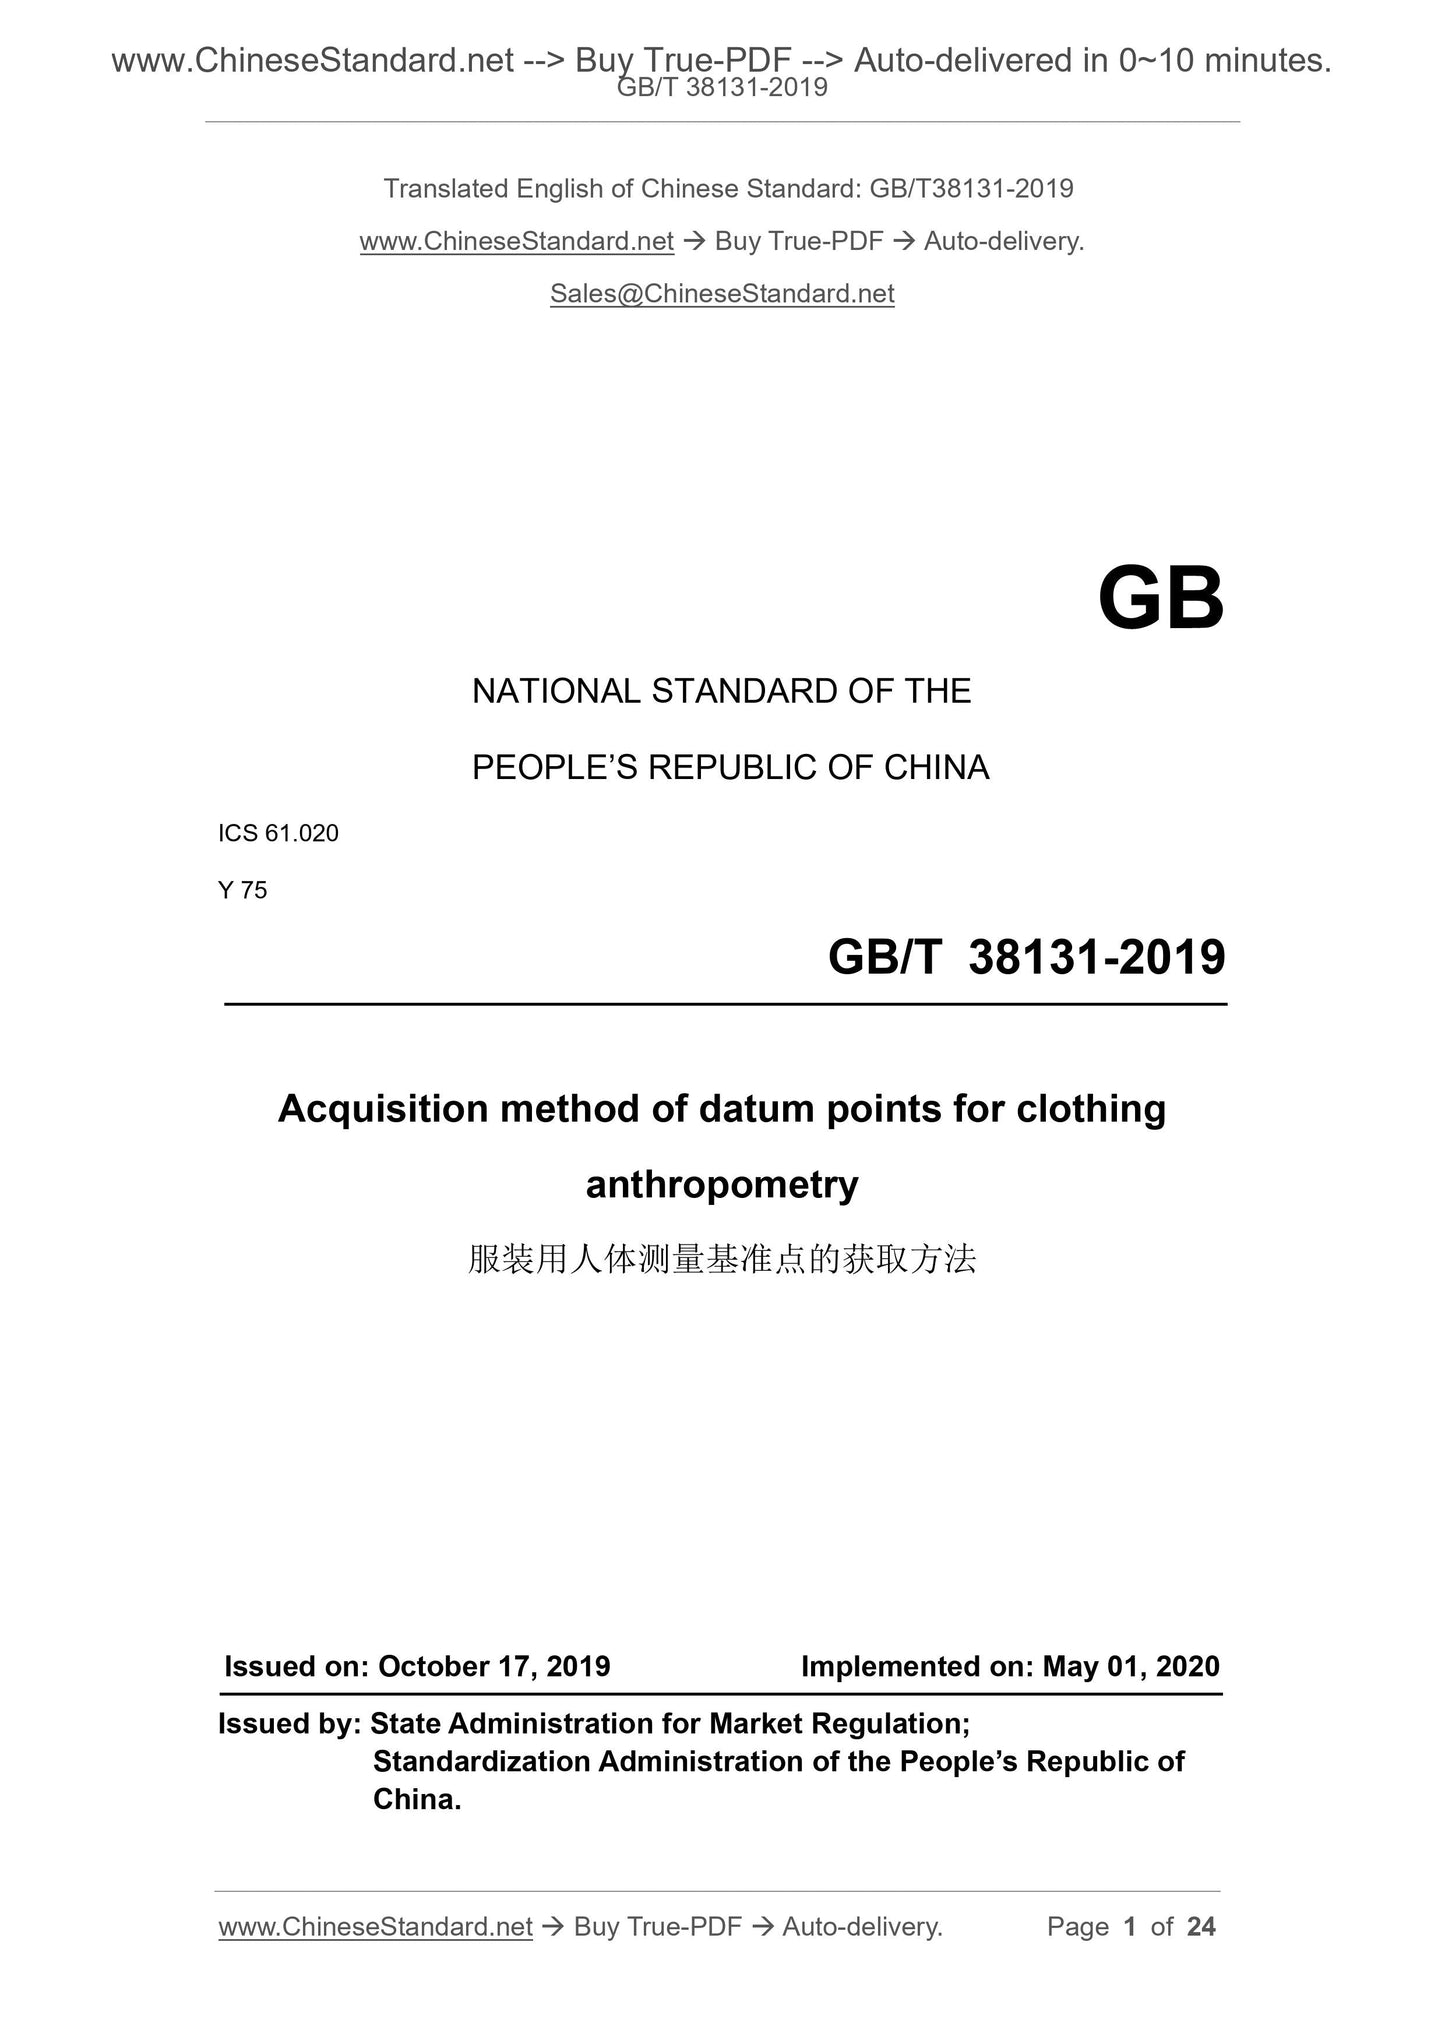 GB/T 38131-2019 Page 1